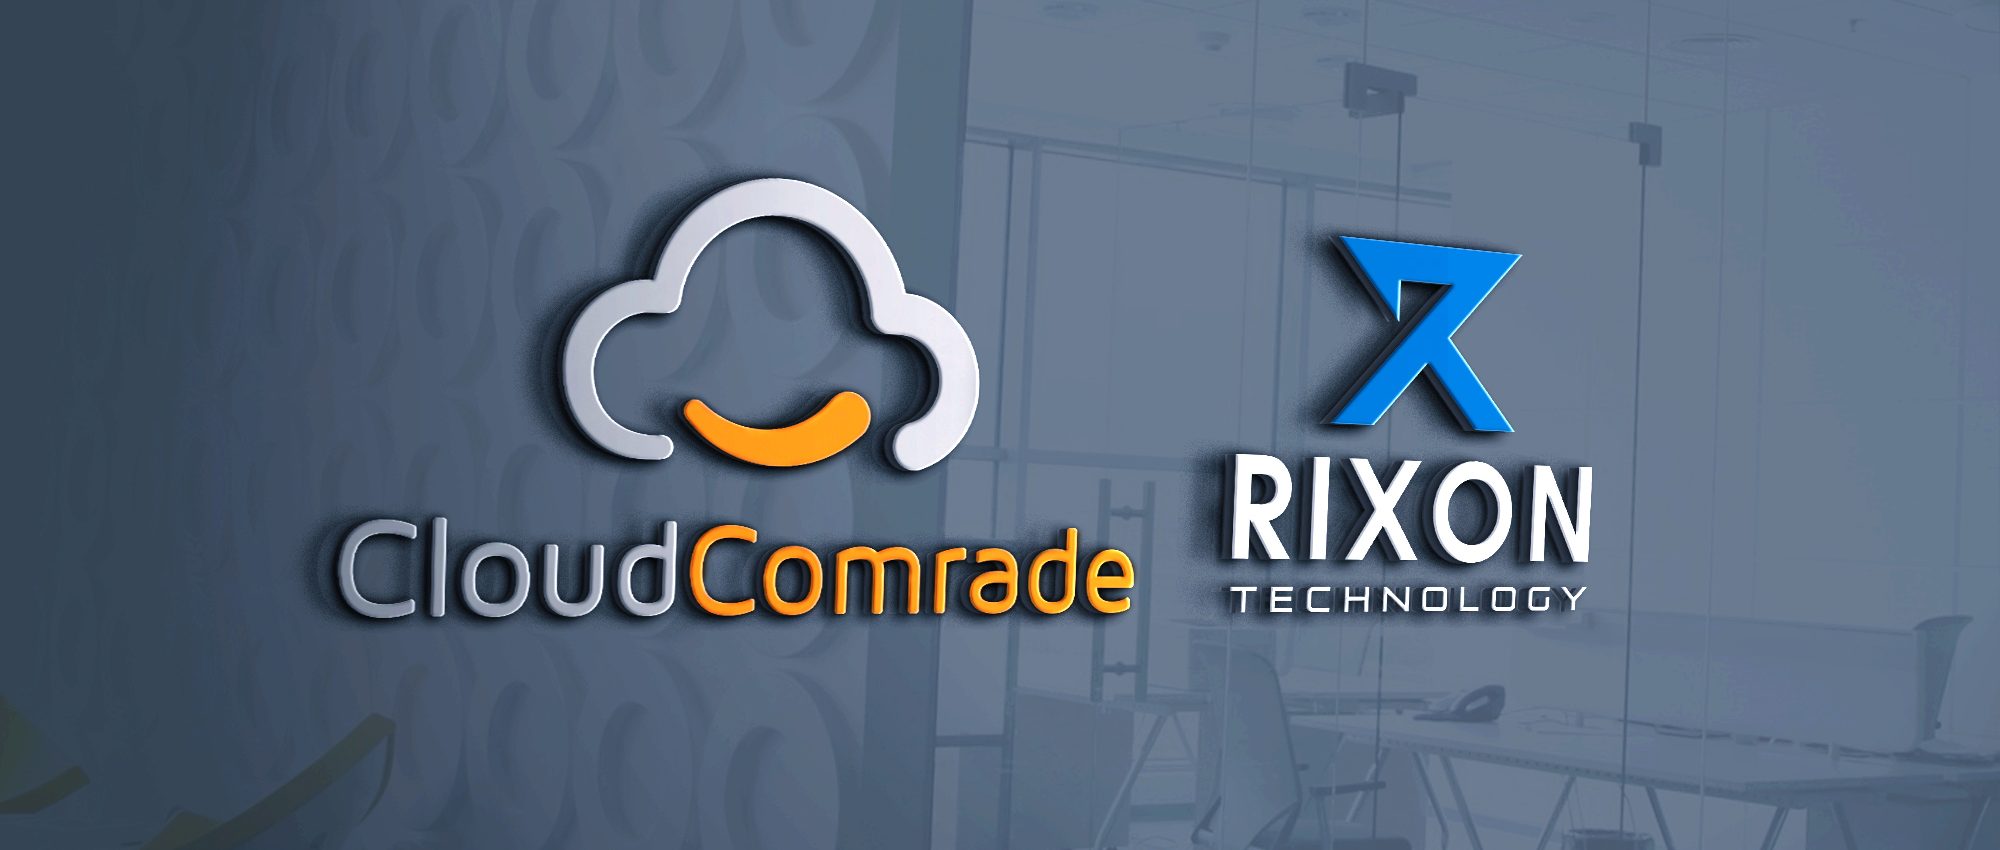 Rixon Technology Partners With Cloud Comrade To Bring Security Services To APAC